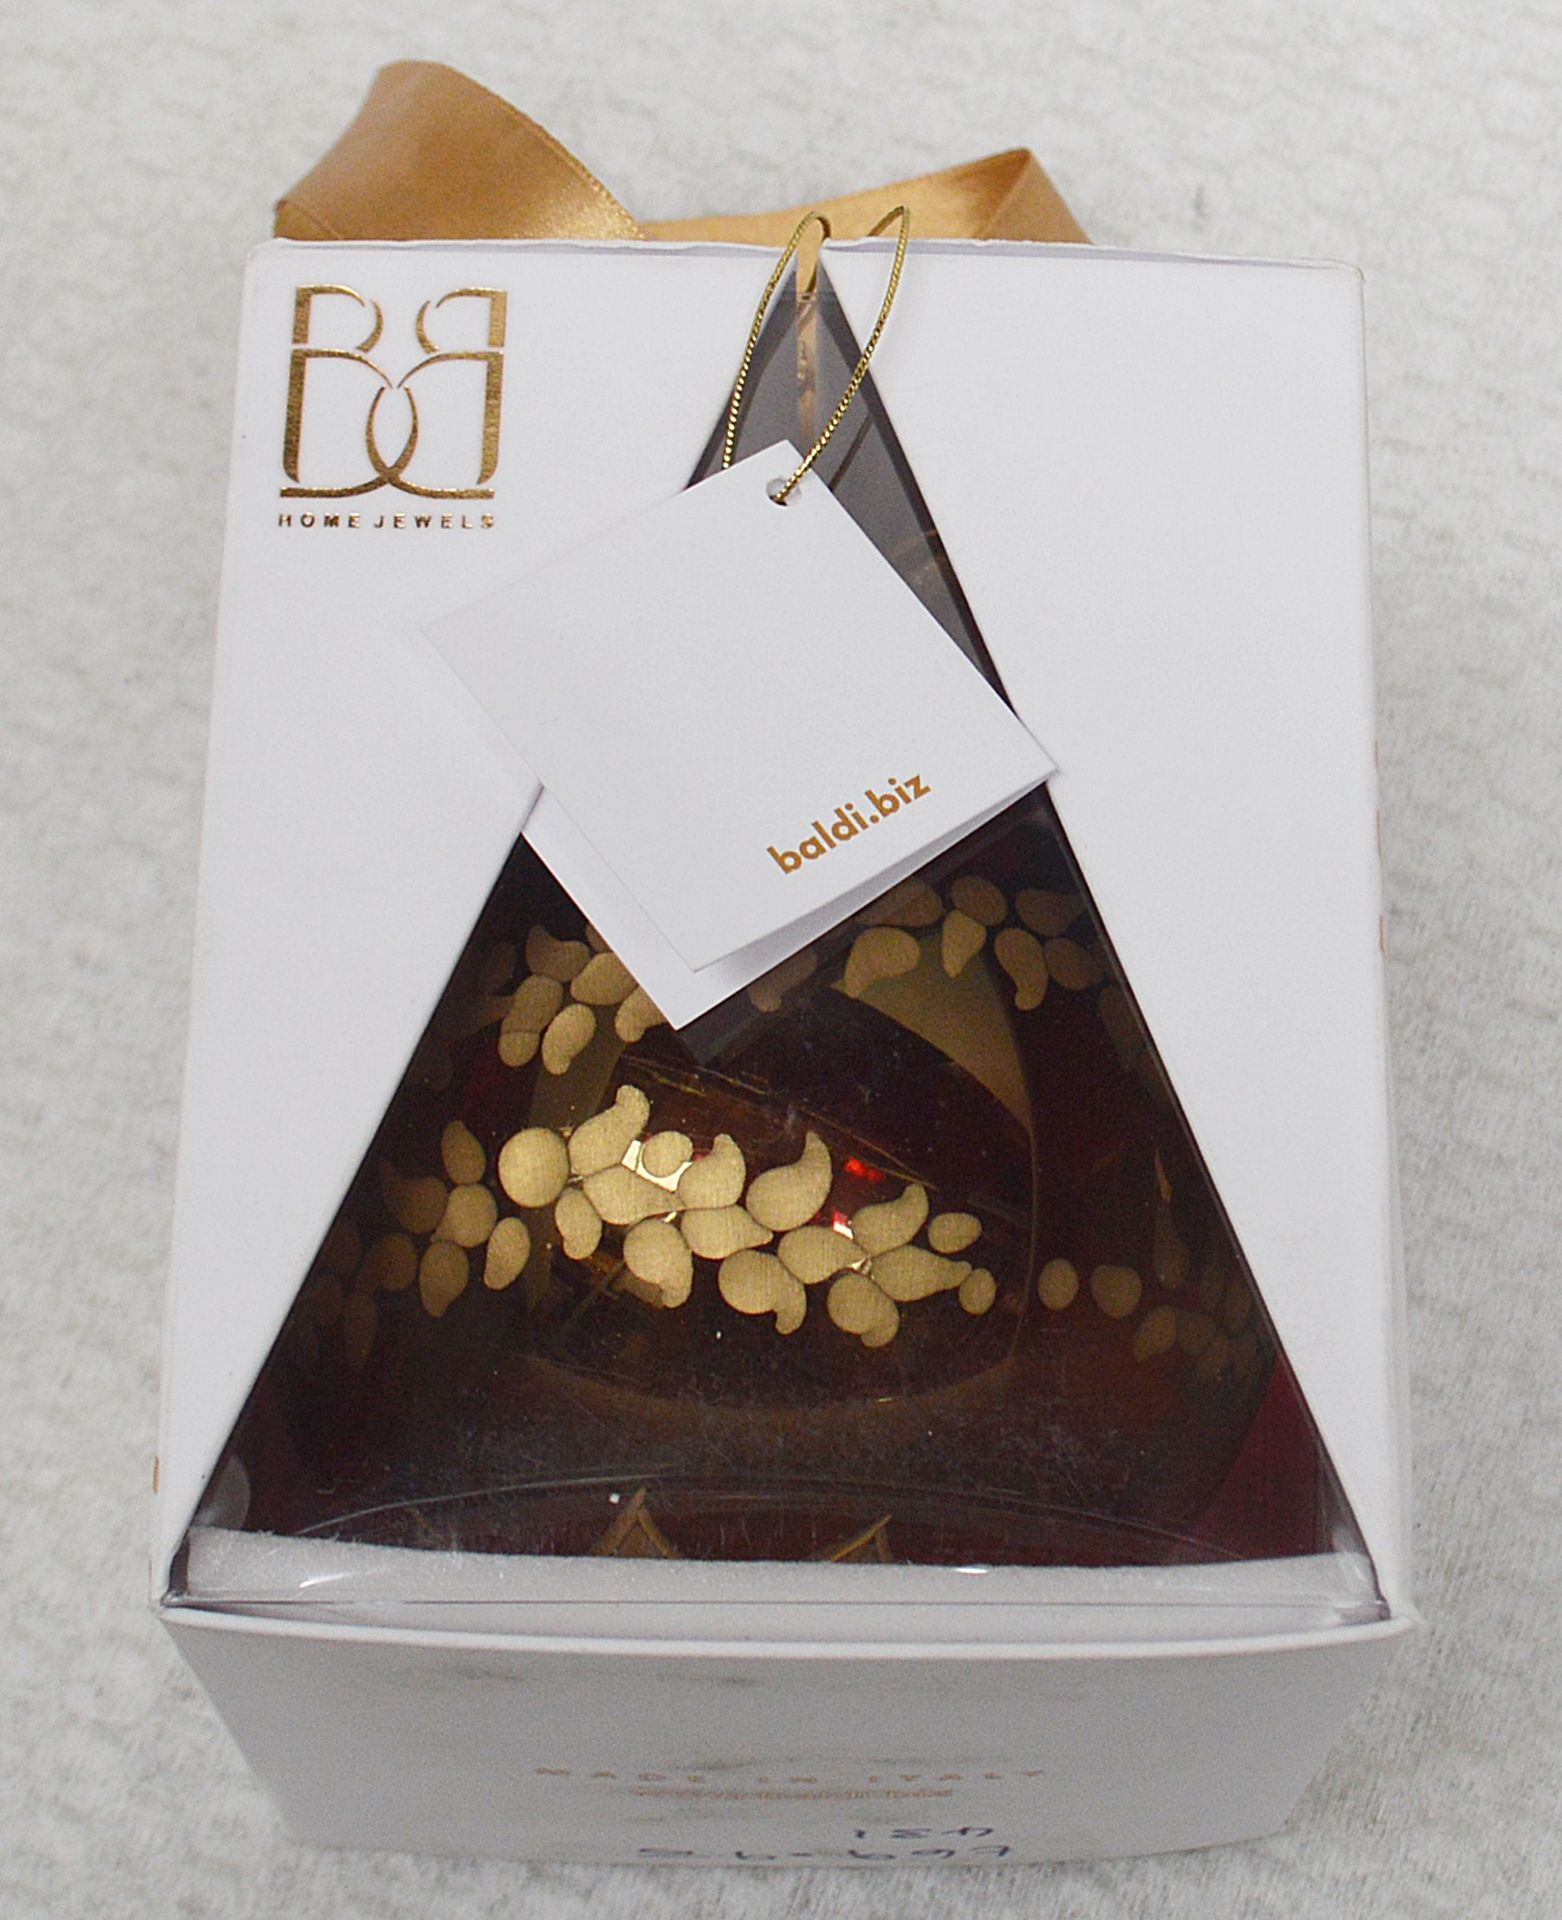 1 x BALDI 'Home Jewels' Italian Hand-crafted Artisan Christmas Tree Decoration In Red And Gold - - Image 5 of 5